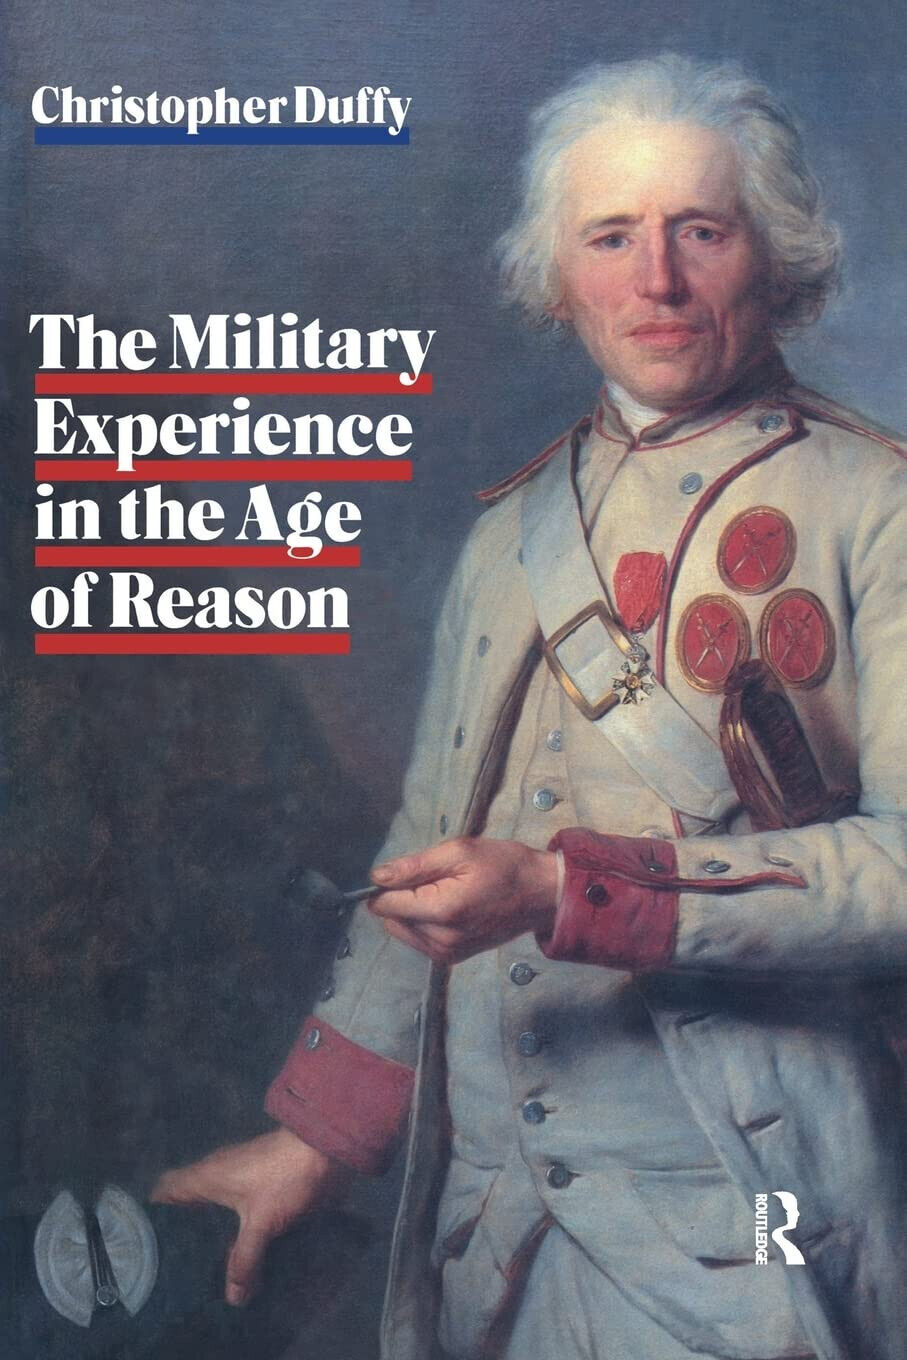 Military Experience in the Age of Reason - Christopher Duffy - Routledge, 2016